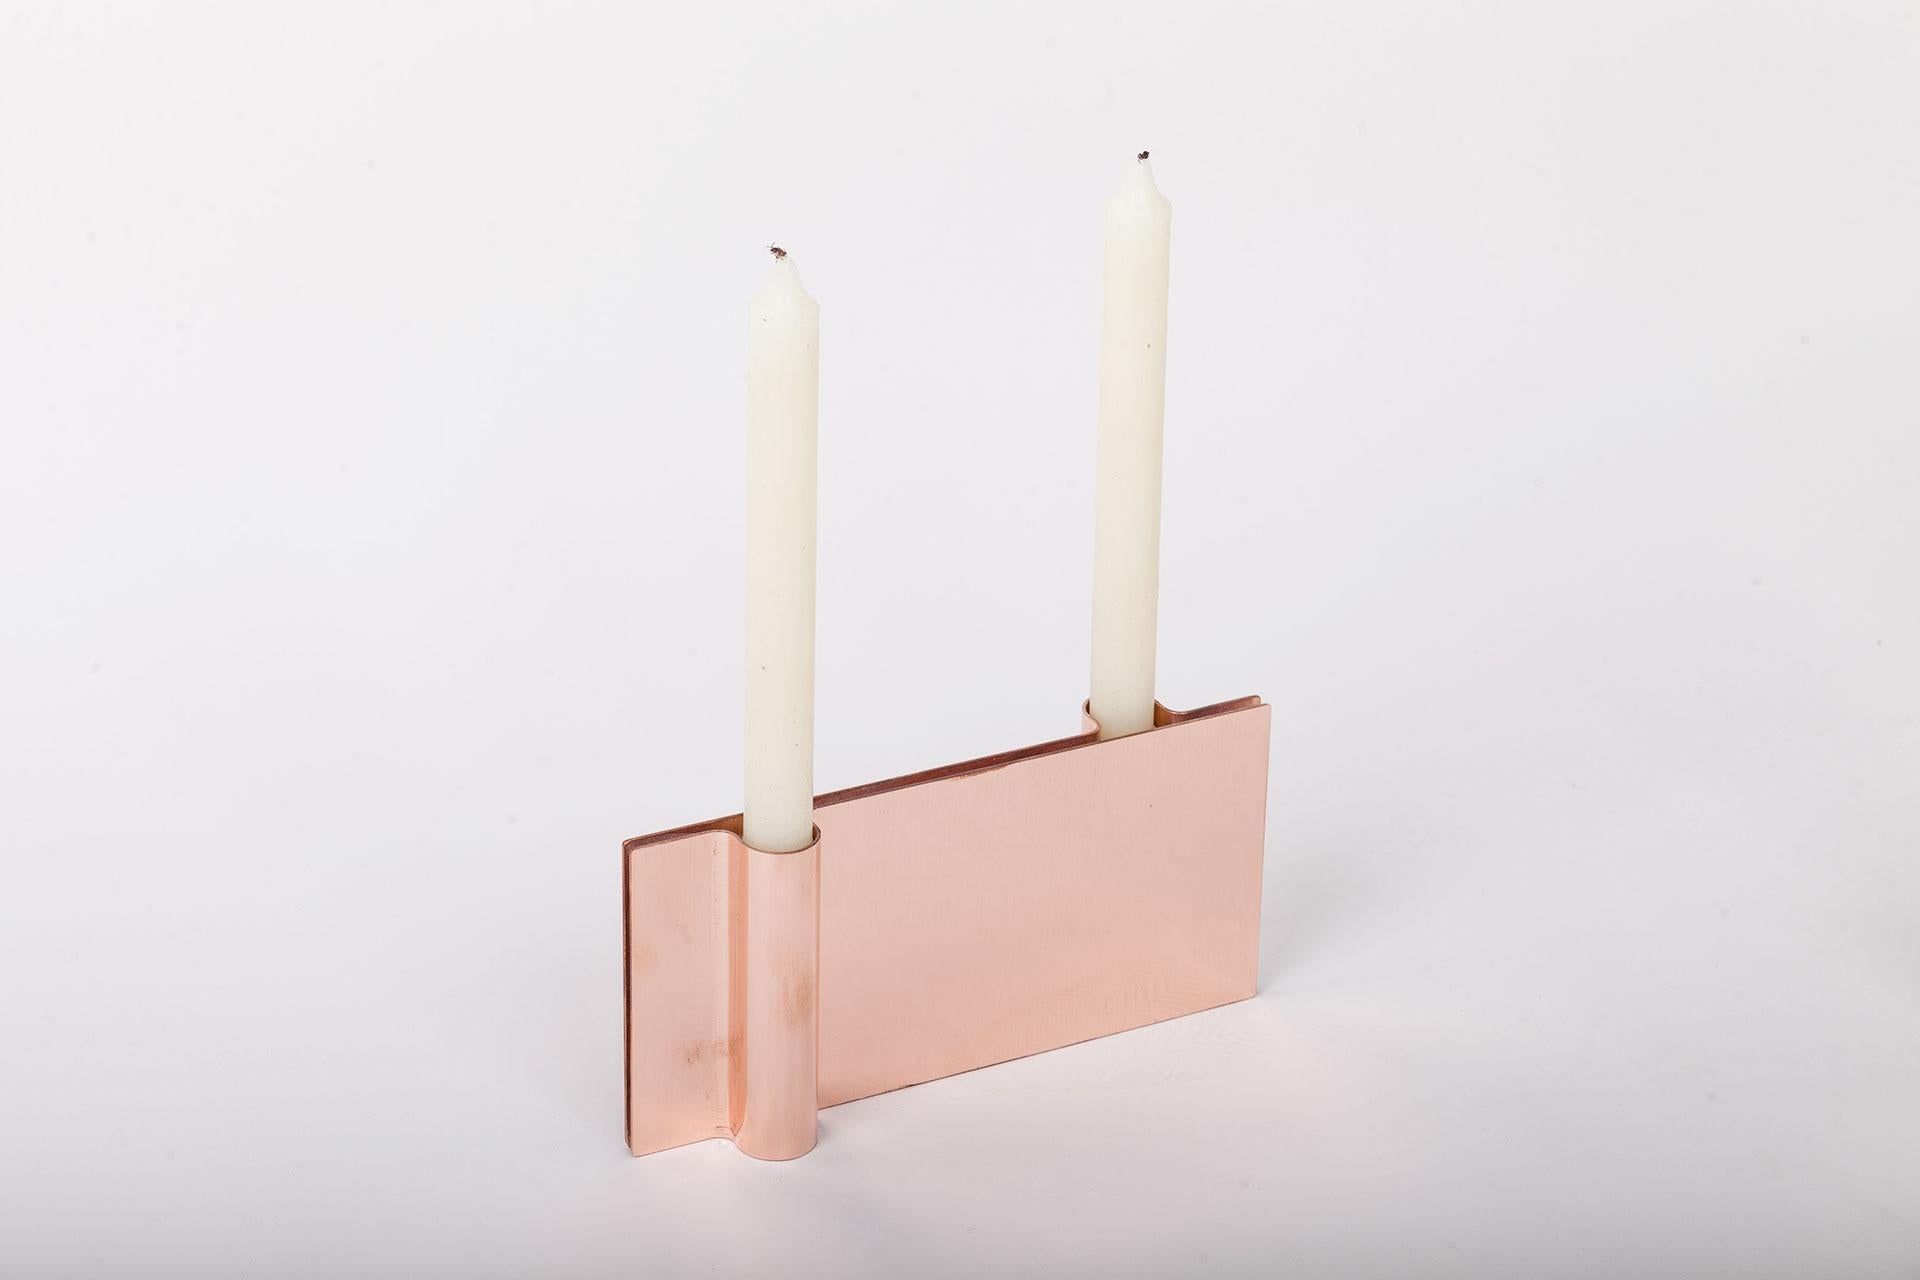 Folio candle holder by Mingardo
Dimensions: D22.5 x W2.2 x H11 cm 
Materials: polished natural copper.
Weight: 1.5 kg

Also available in different finishes: Polished natural copper, Polished natural brass, Polished natural stainless